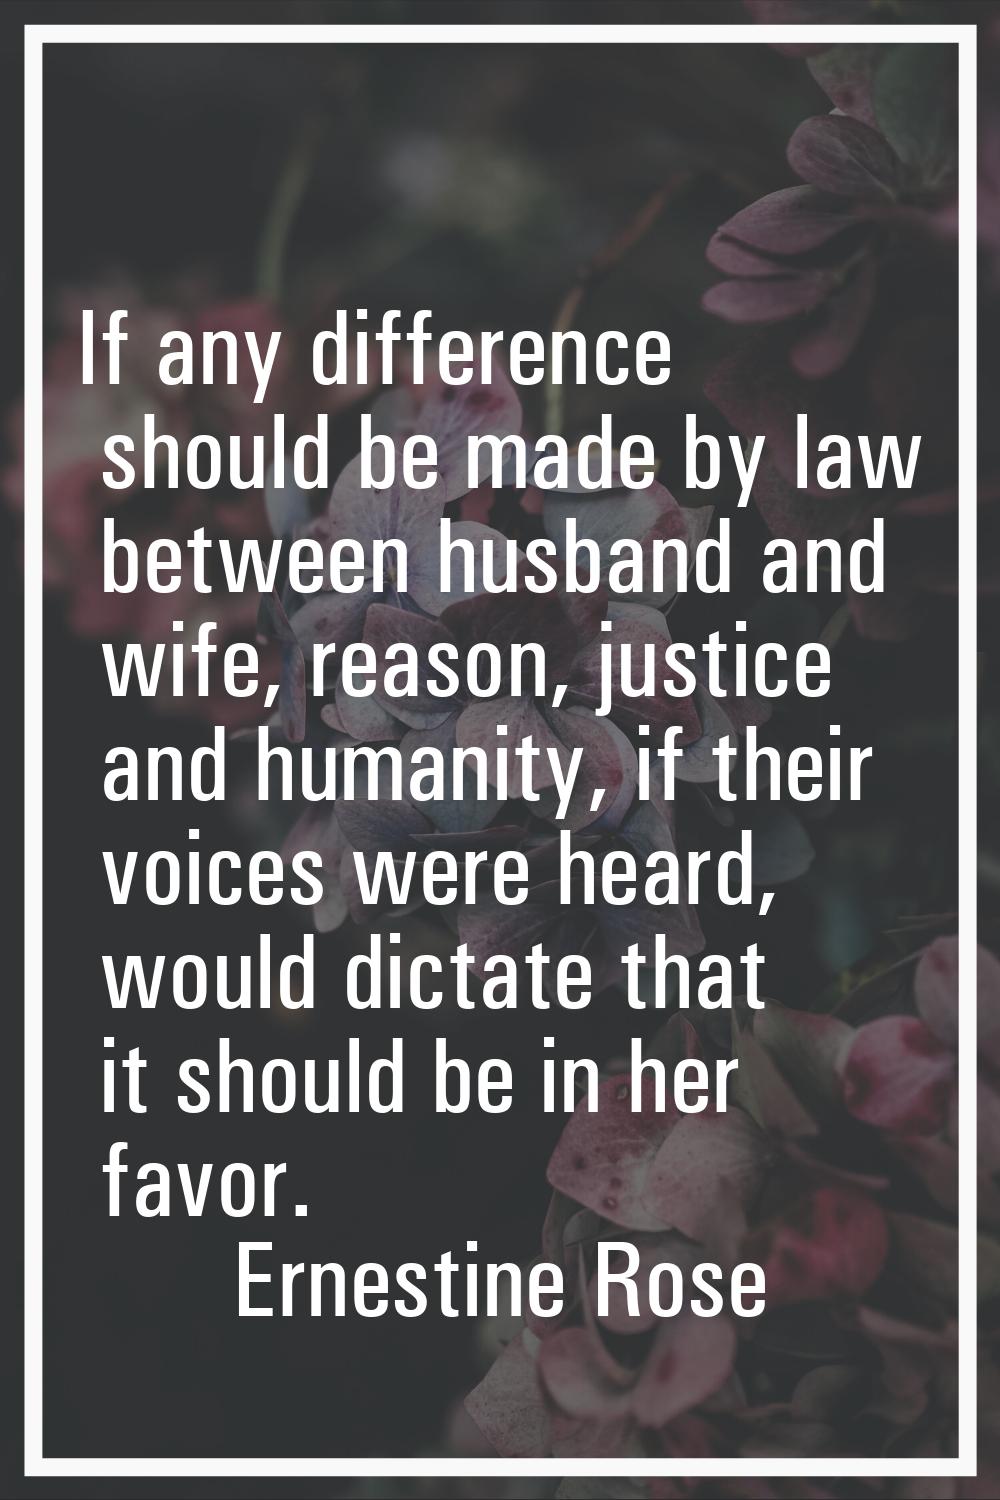 If any difference should be made by law between husband and wife, reason, justice and humanity, if 